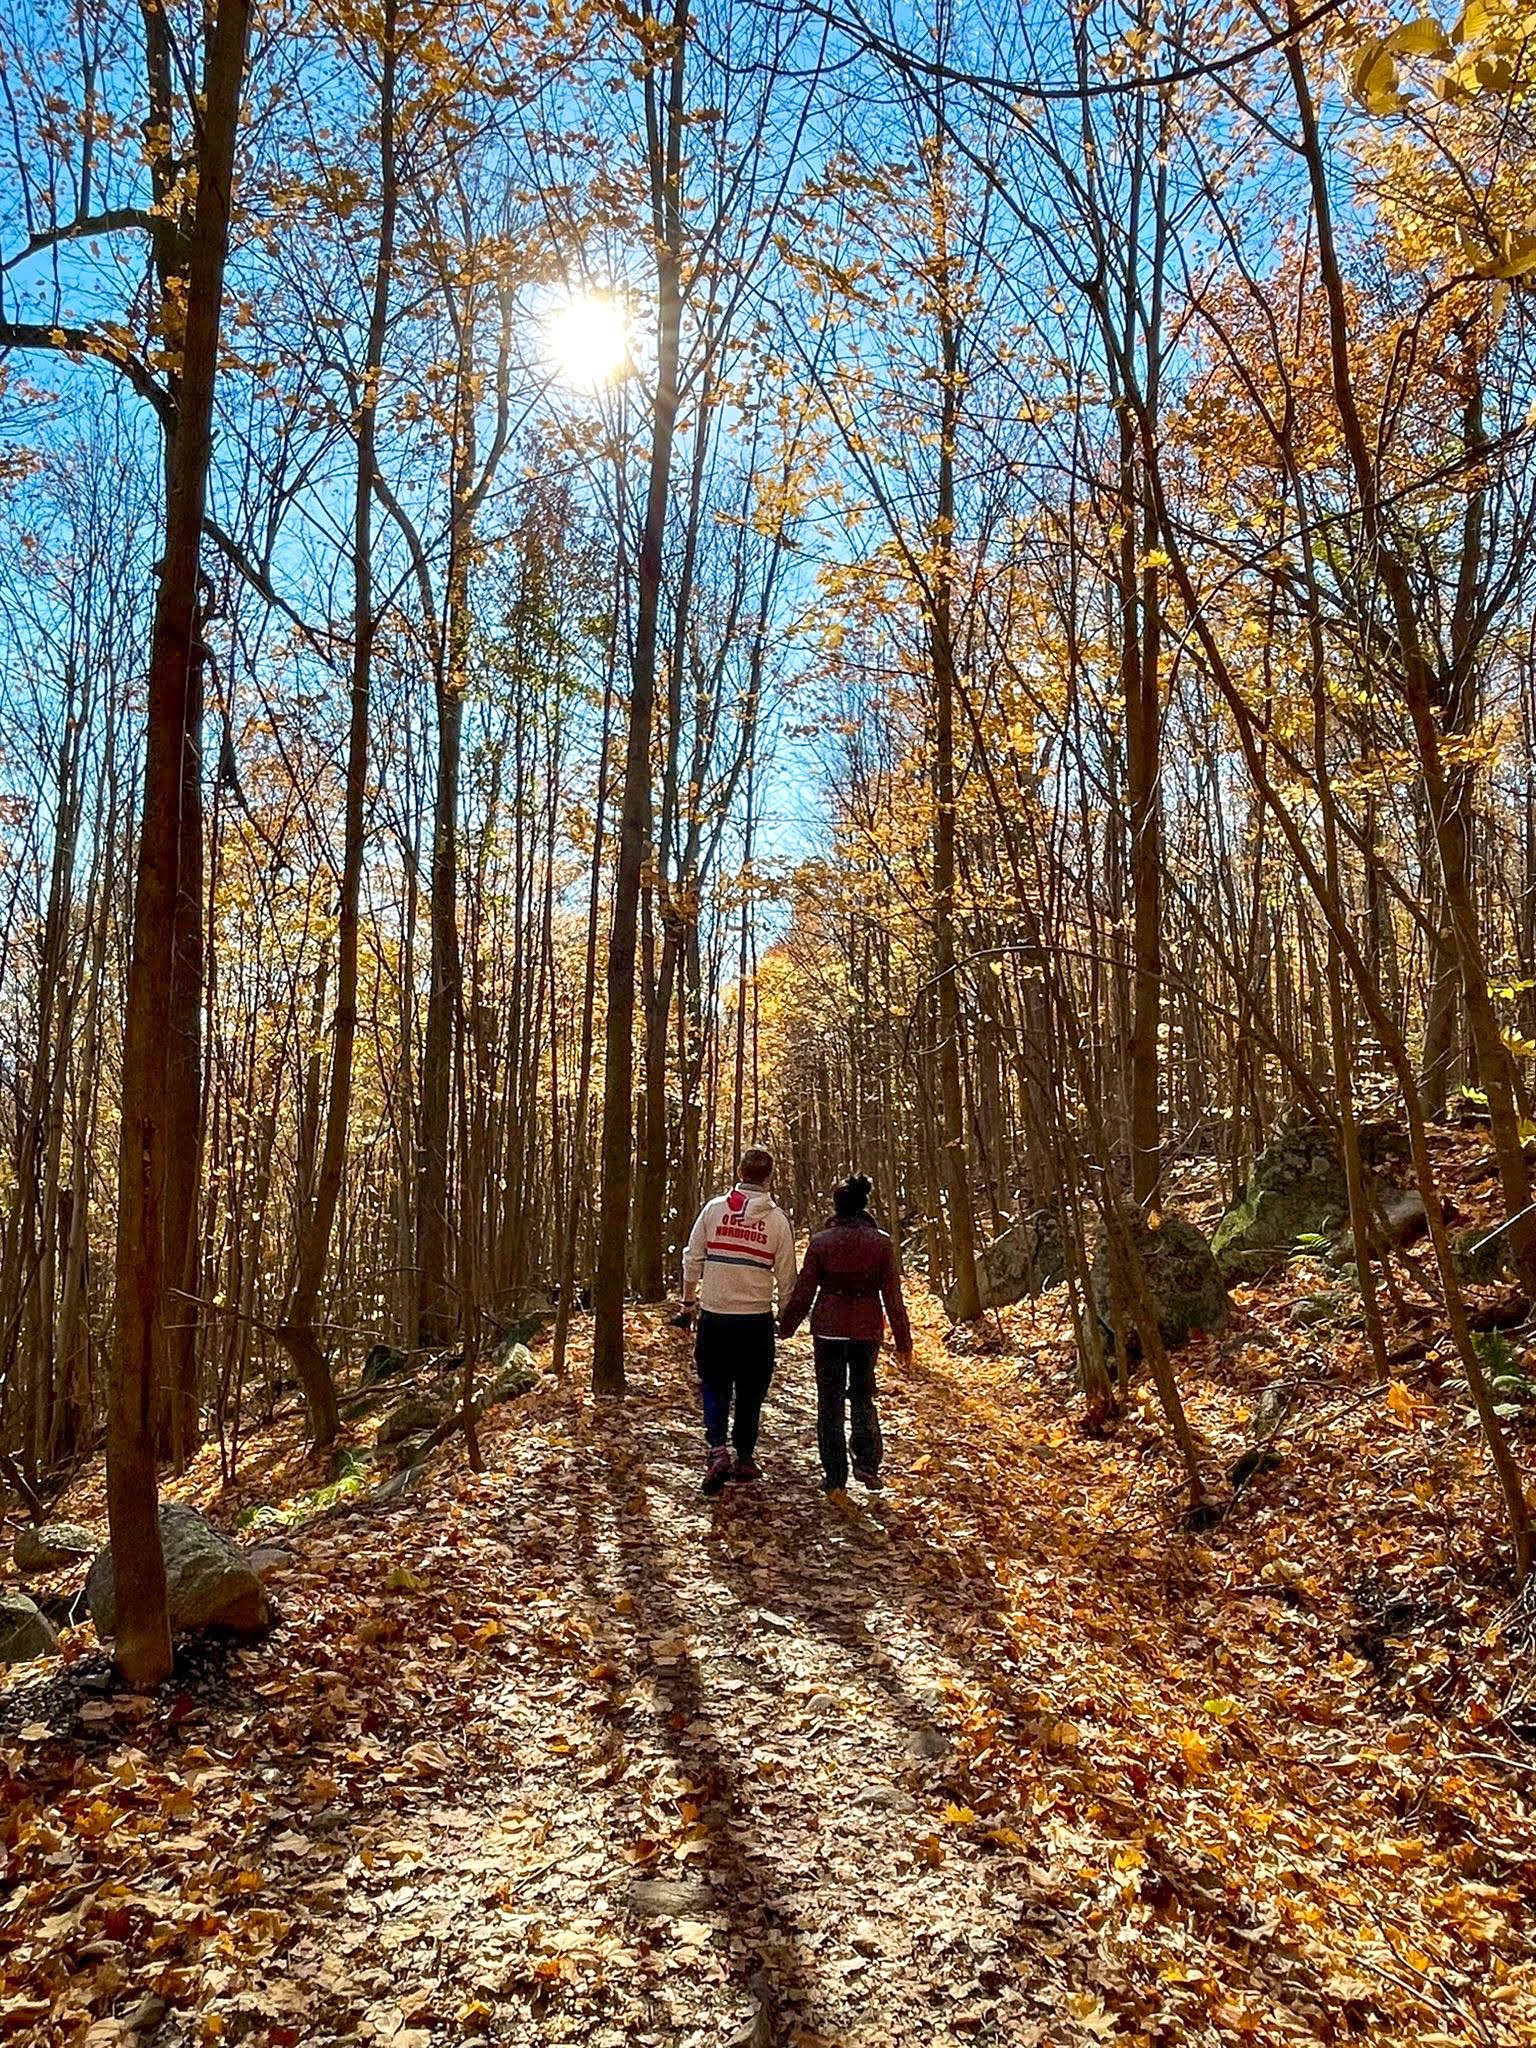 take a hike, one of the romantic getaways near Montreal